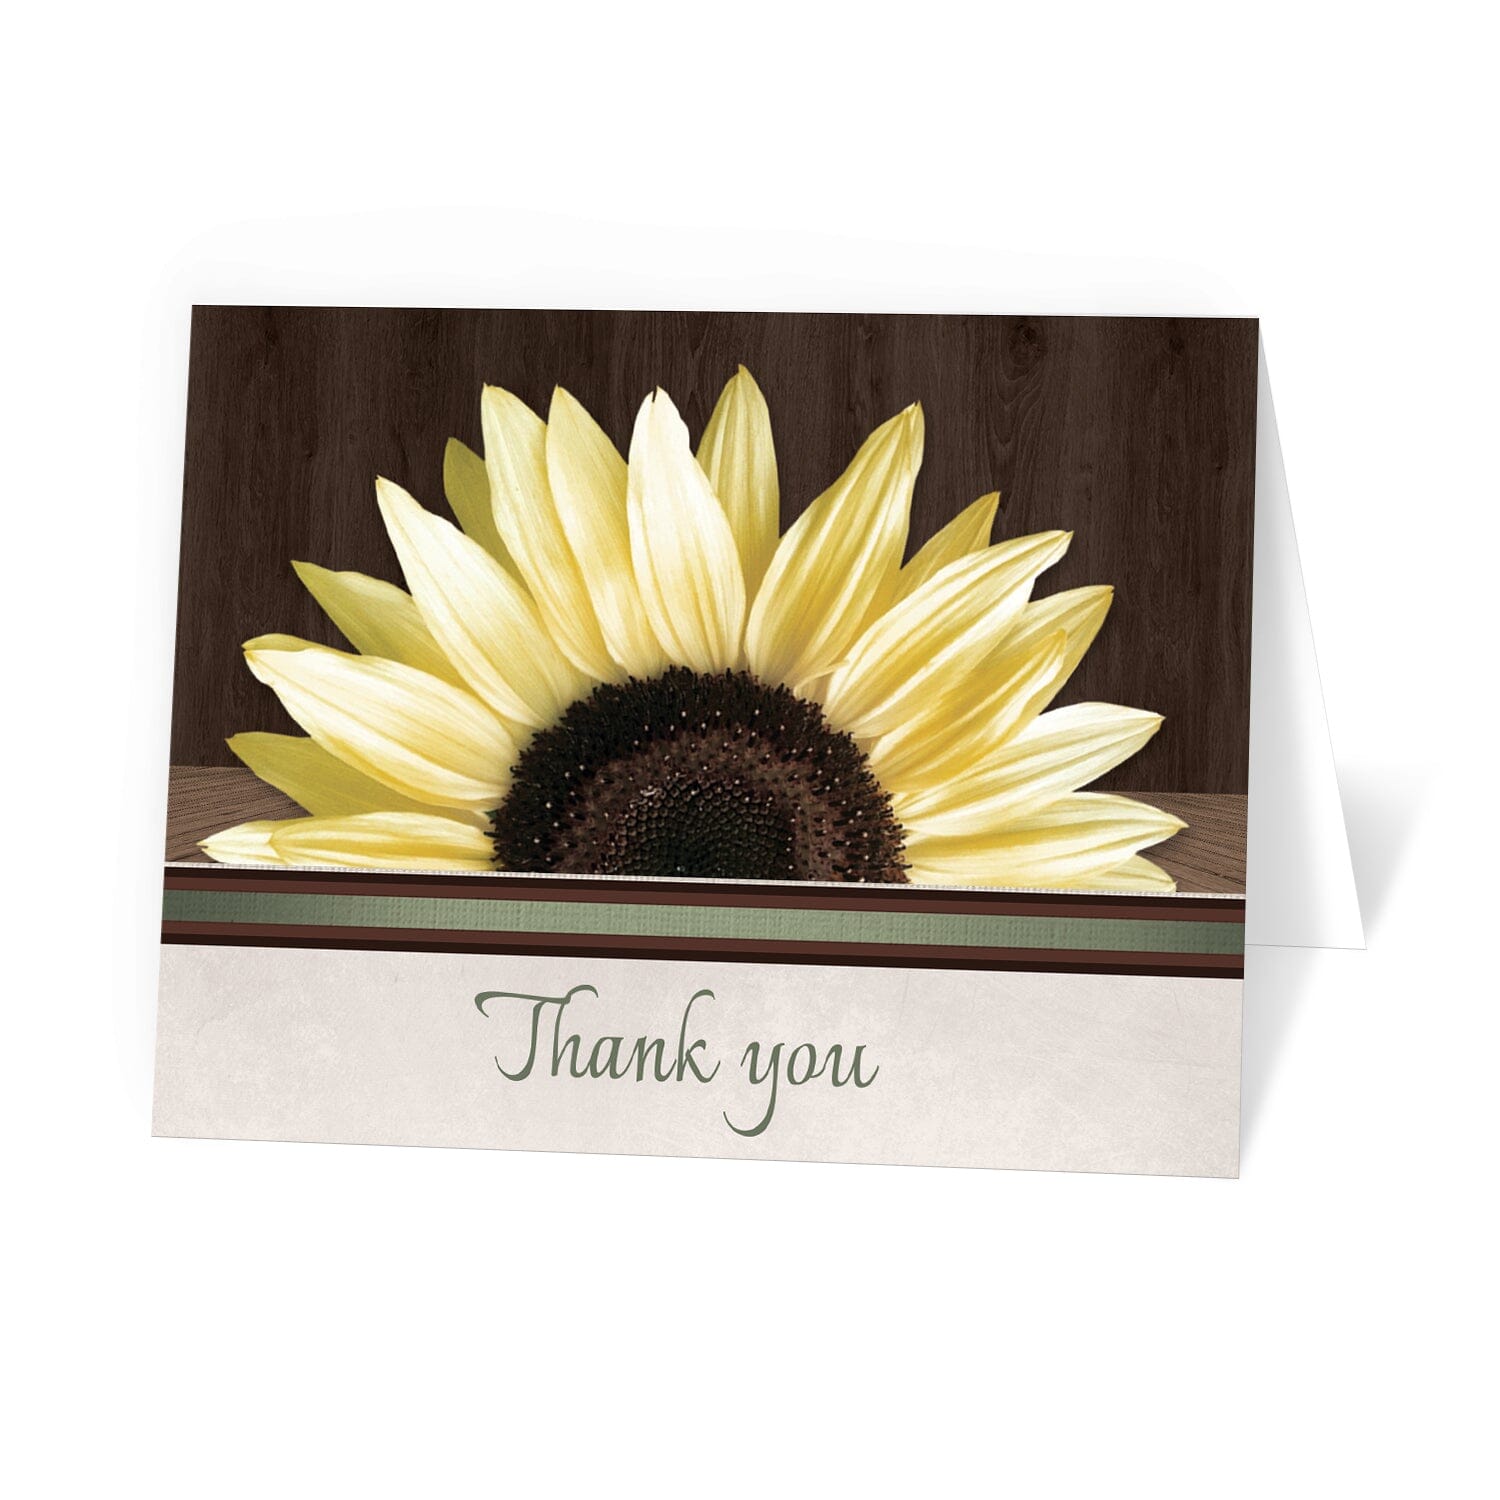 Country Sunflower Over Wood Rustic Thank You Cards at Artistically Invited.